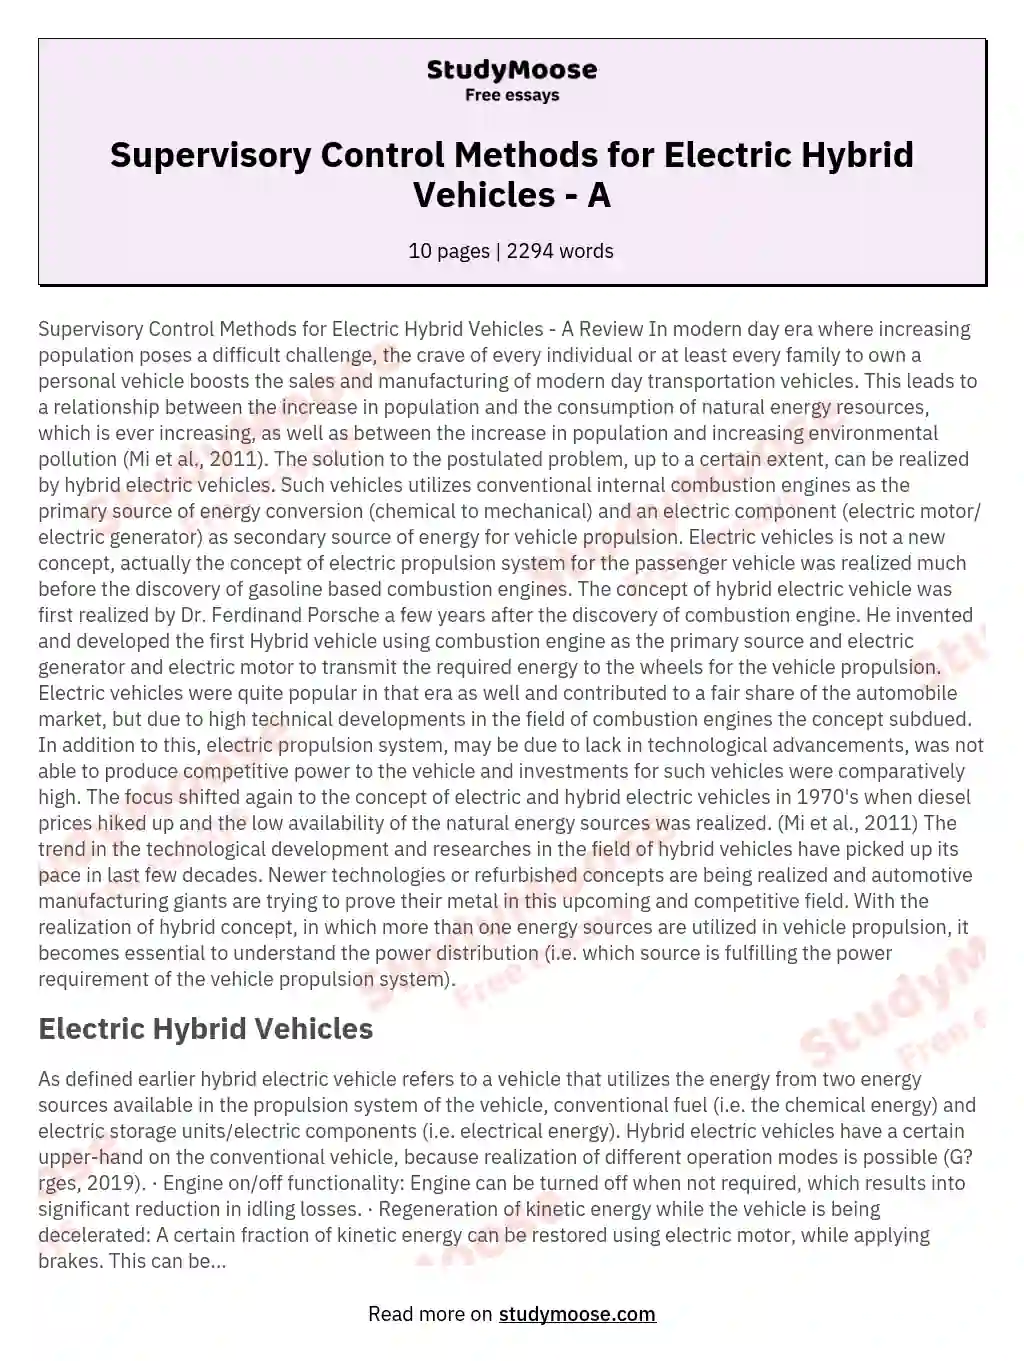 Supervisory Control Methods for Electric Hybrid Vehicles - A essay